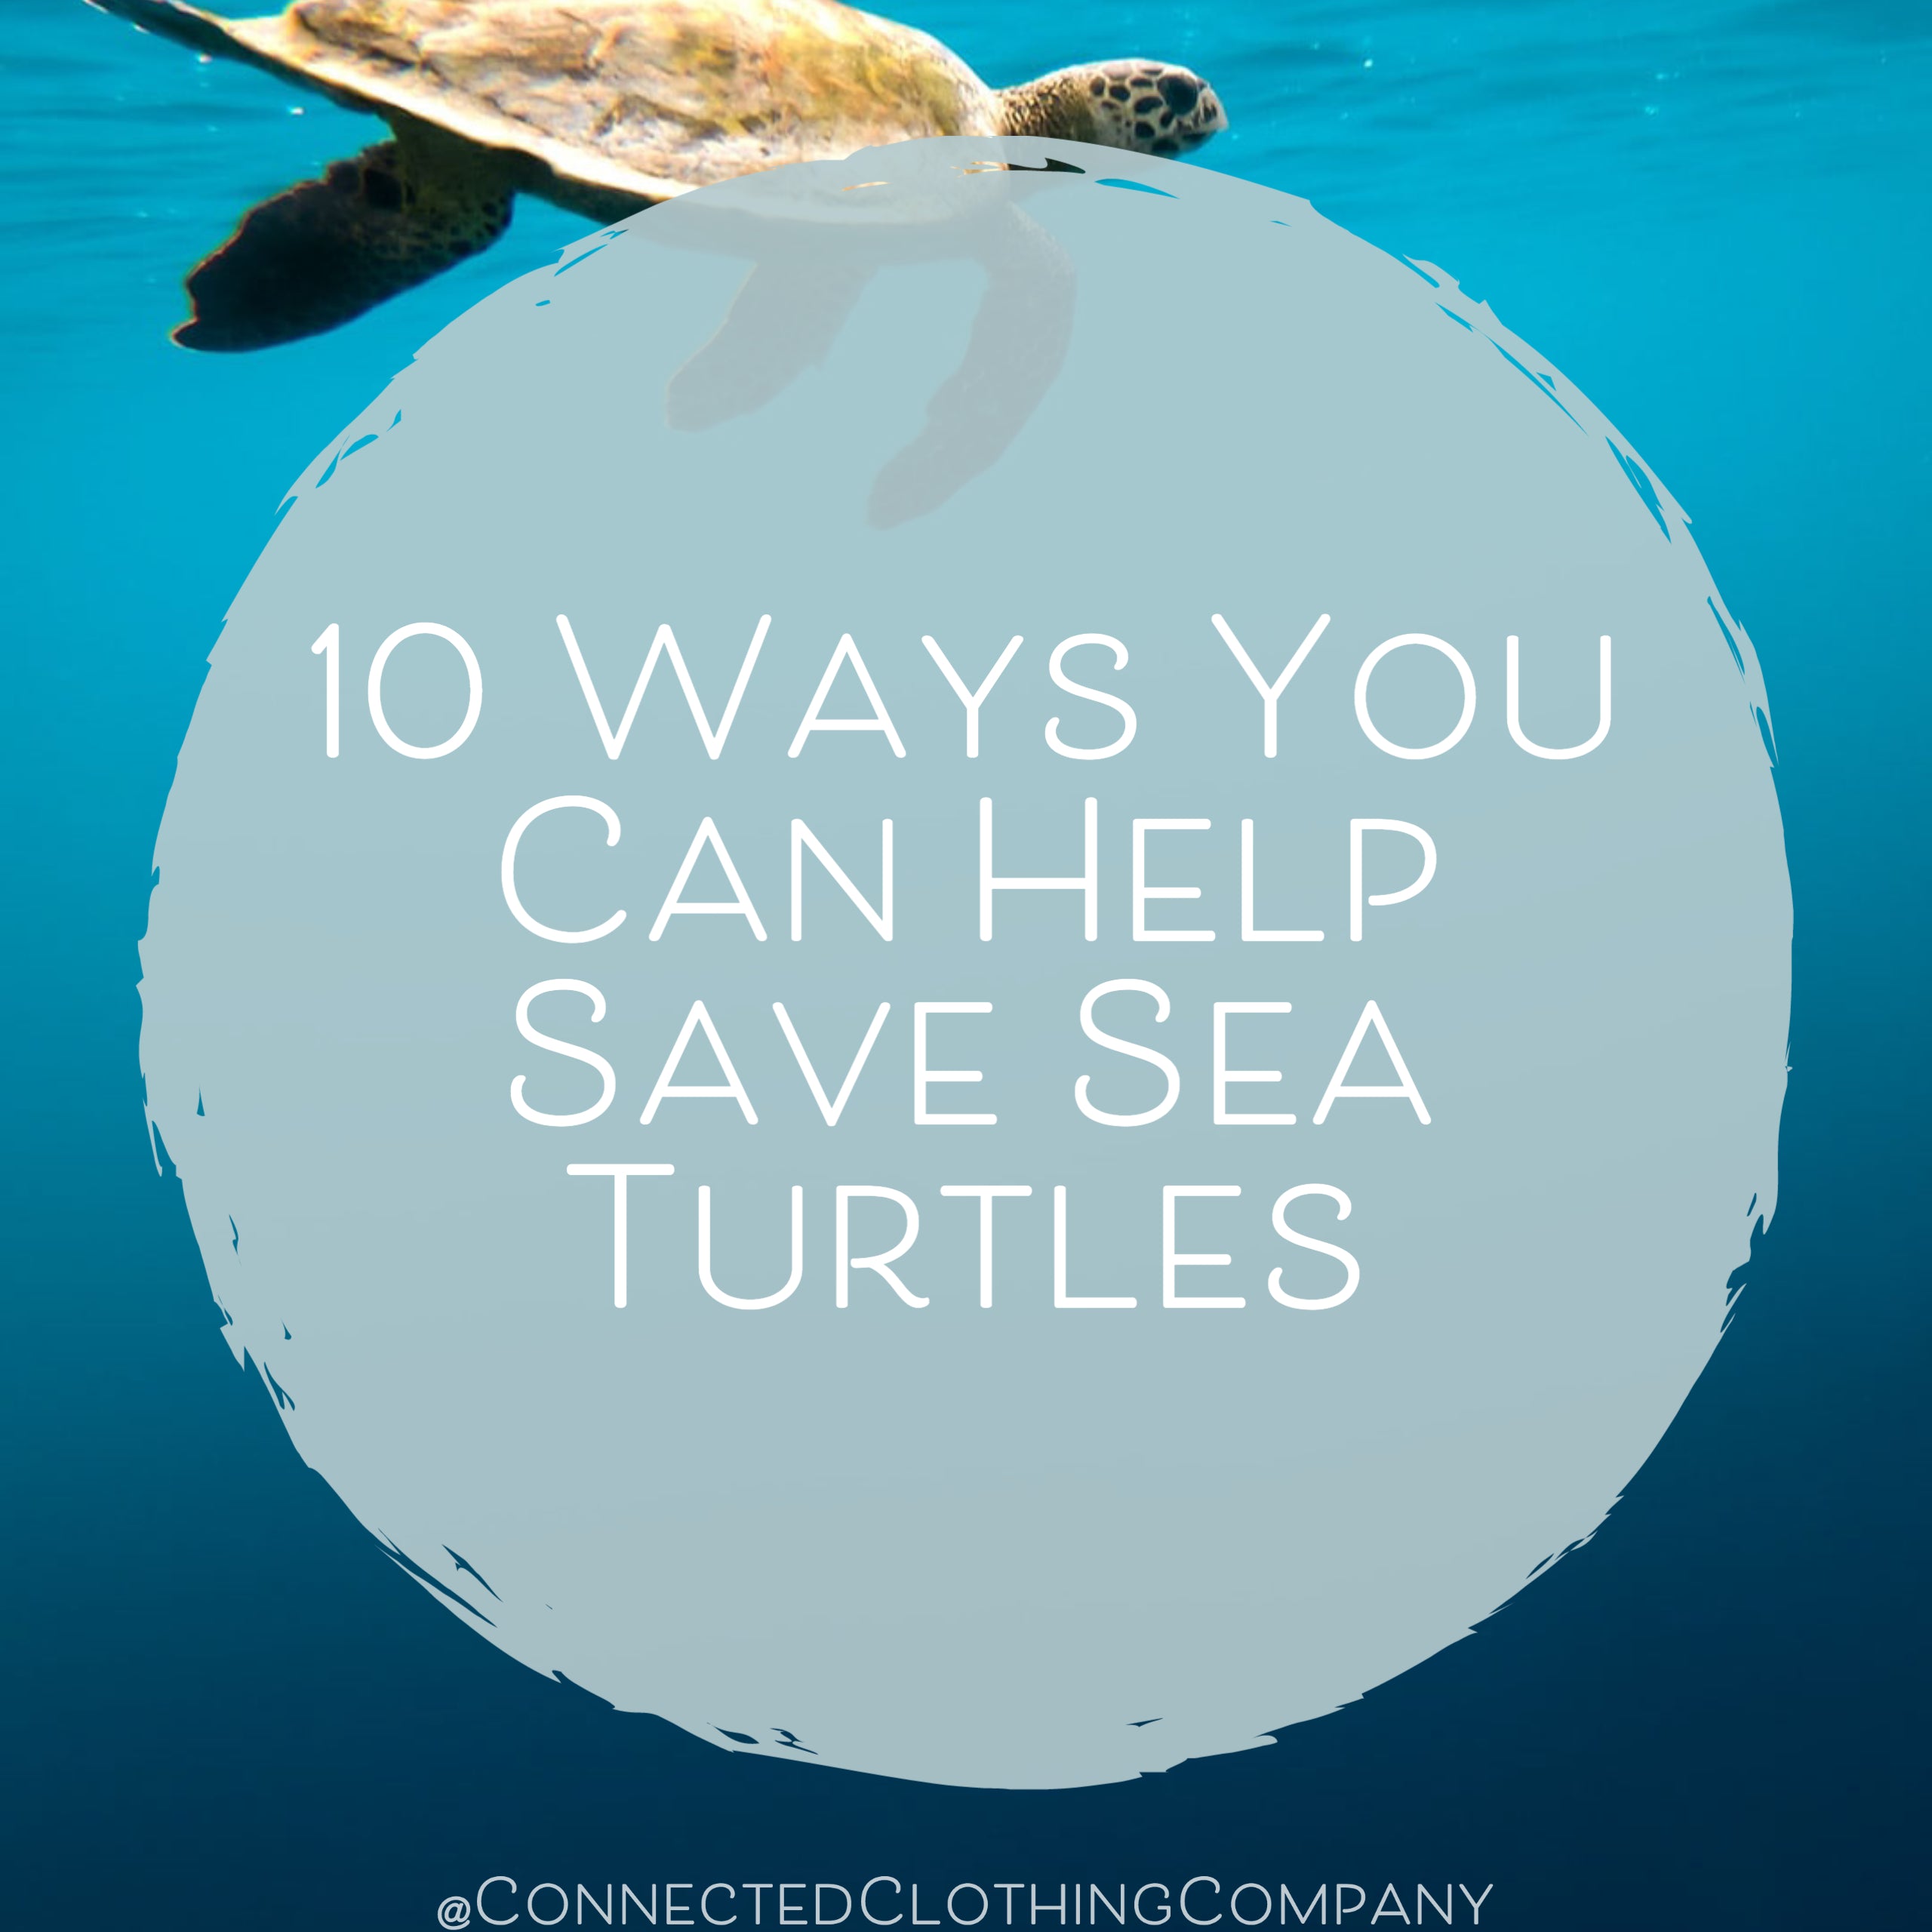 How to Protect Sea Turtles 